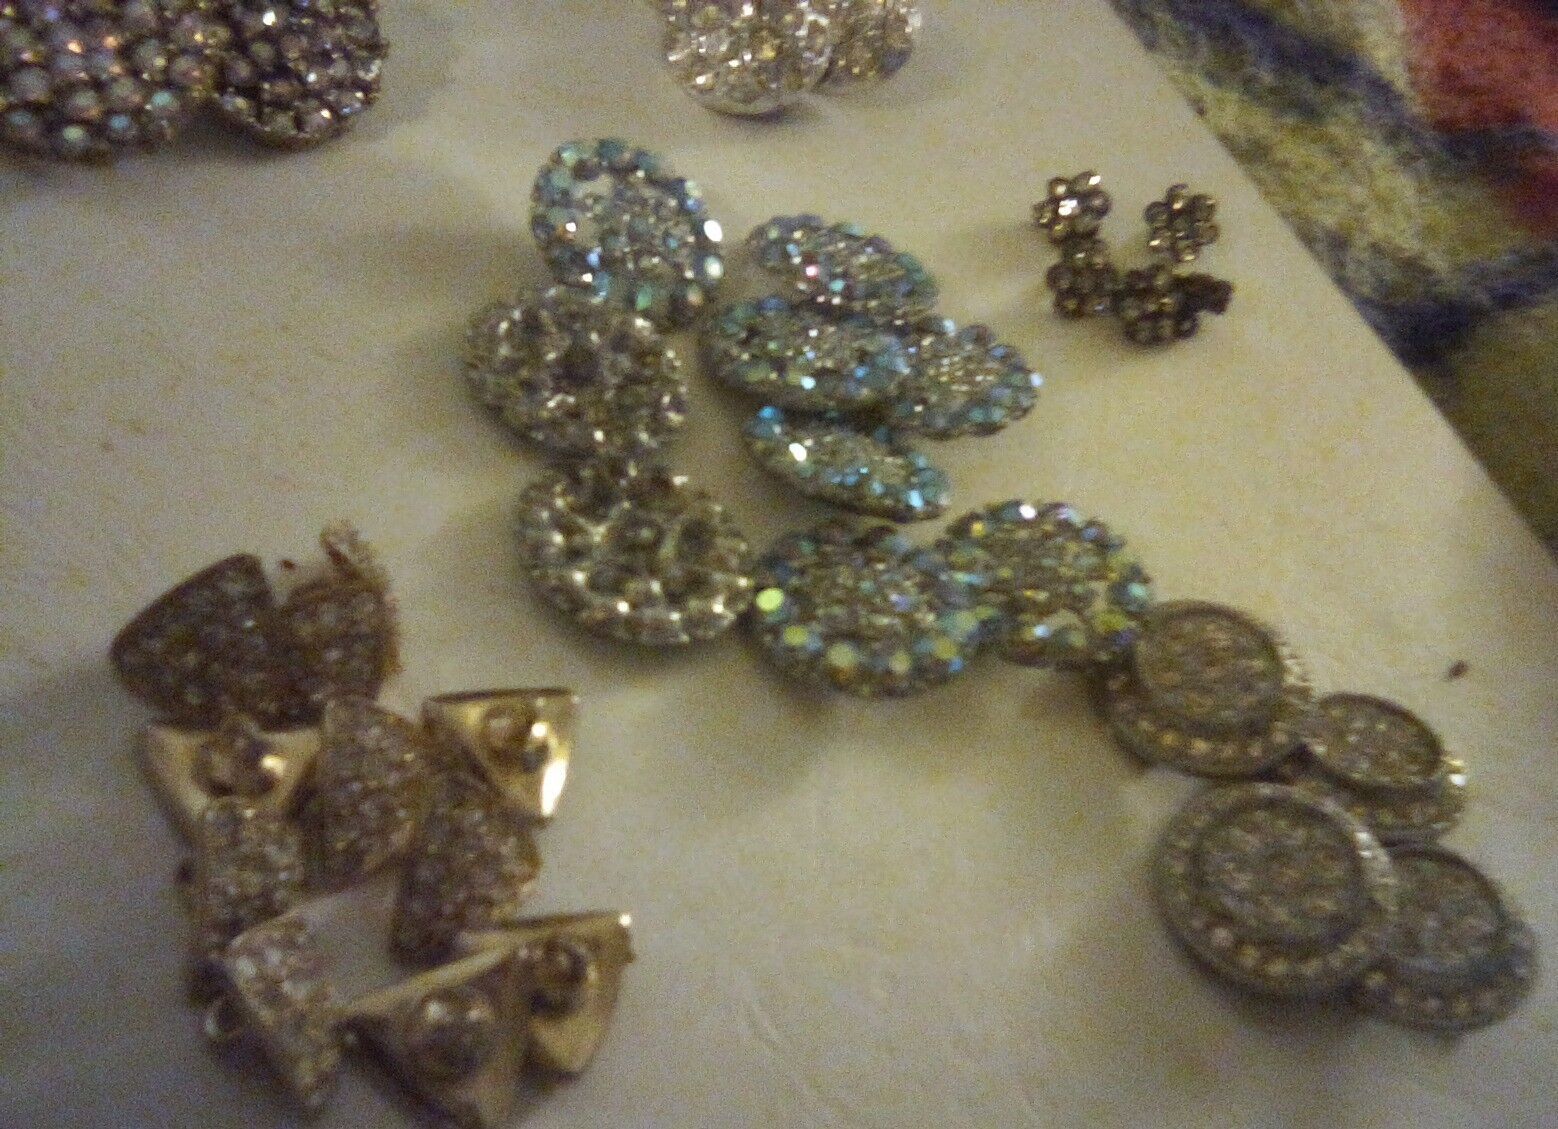 Vintage Lot of 36 RHINESTONE BUTTONS  Measure 3/4” Diameter + Beautiful Sparkly